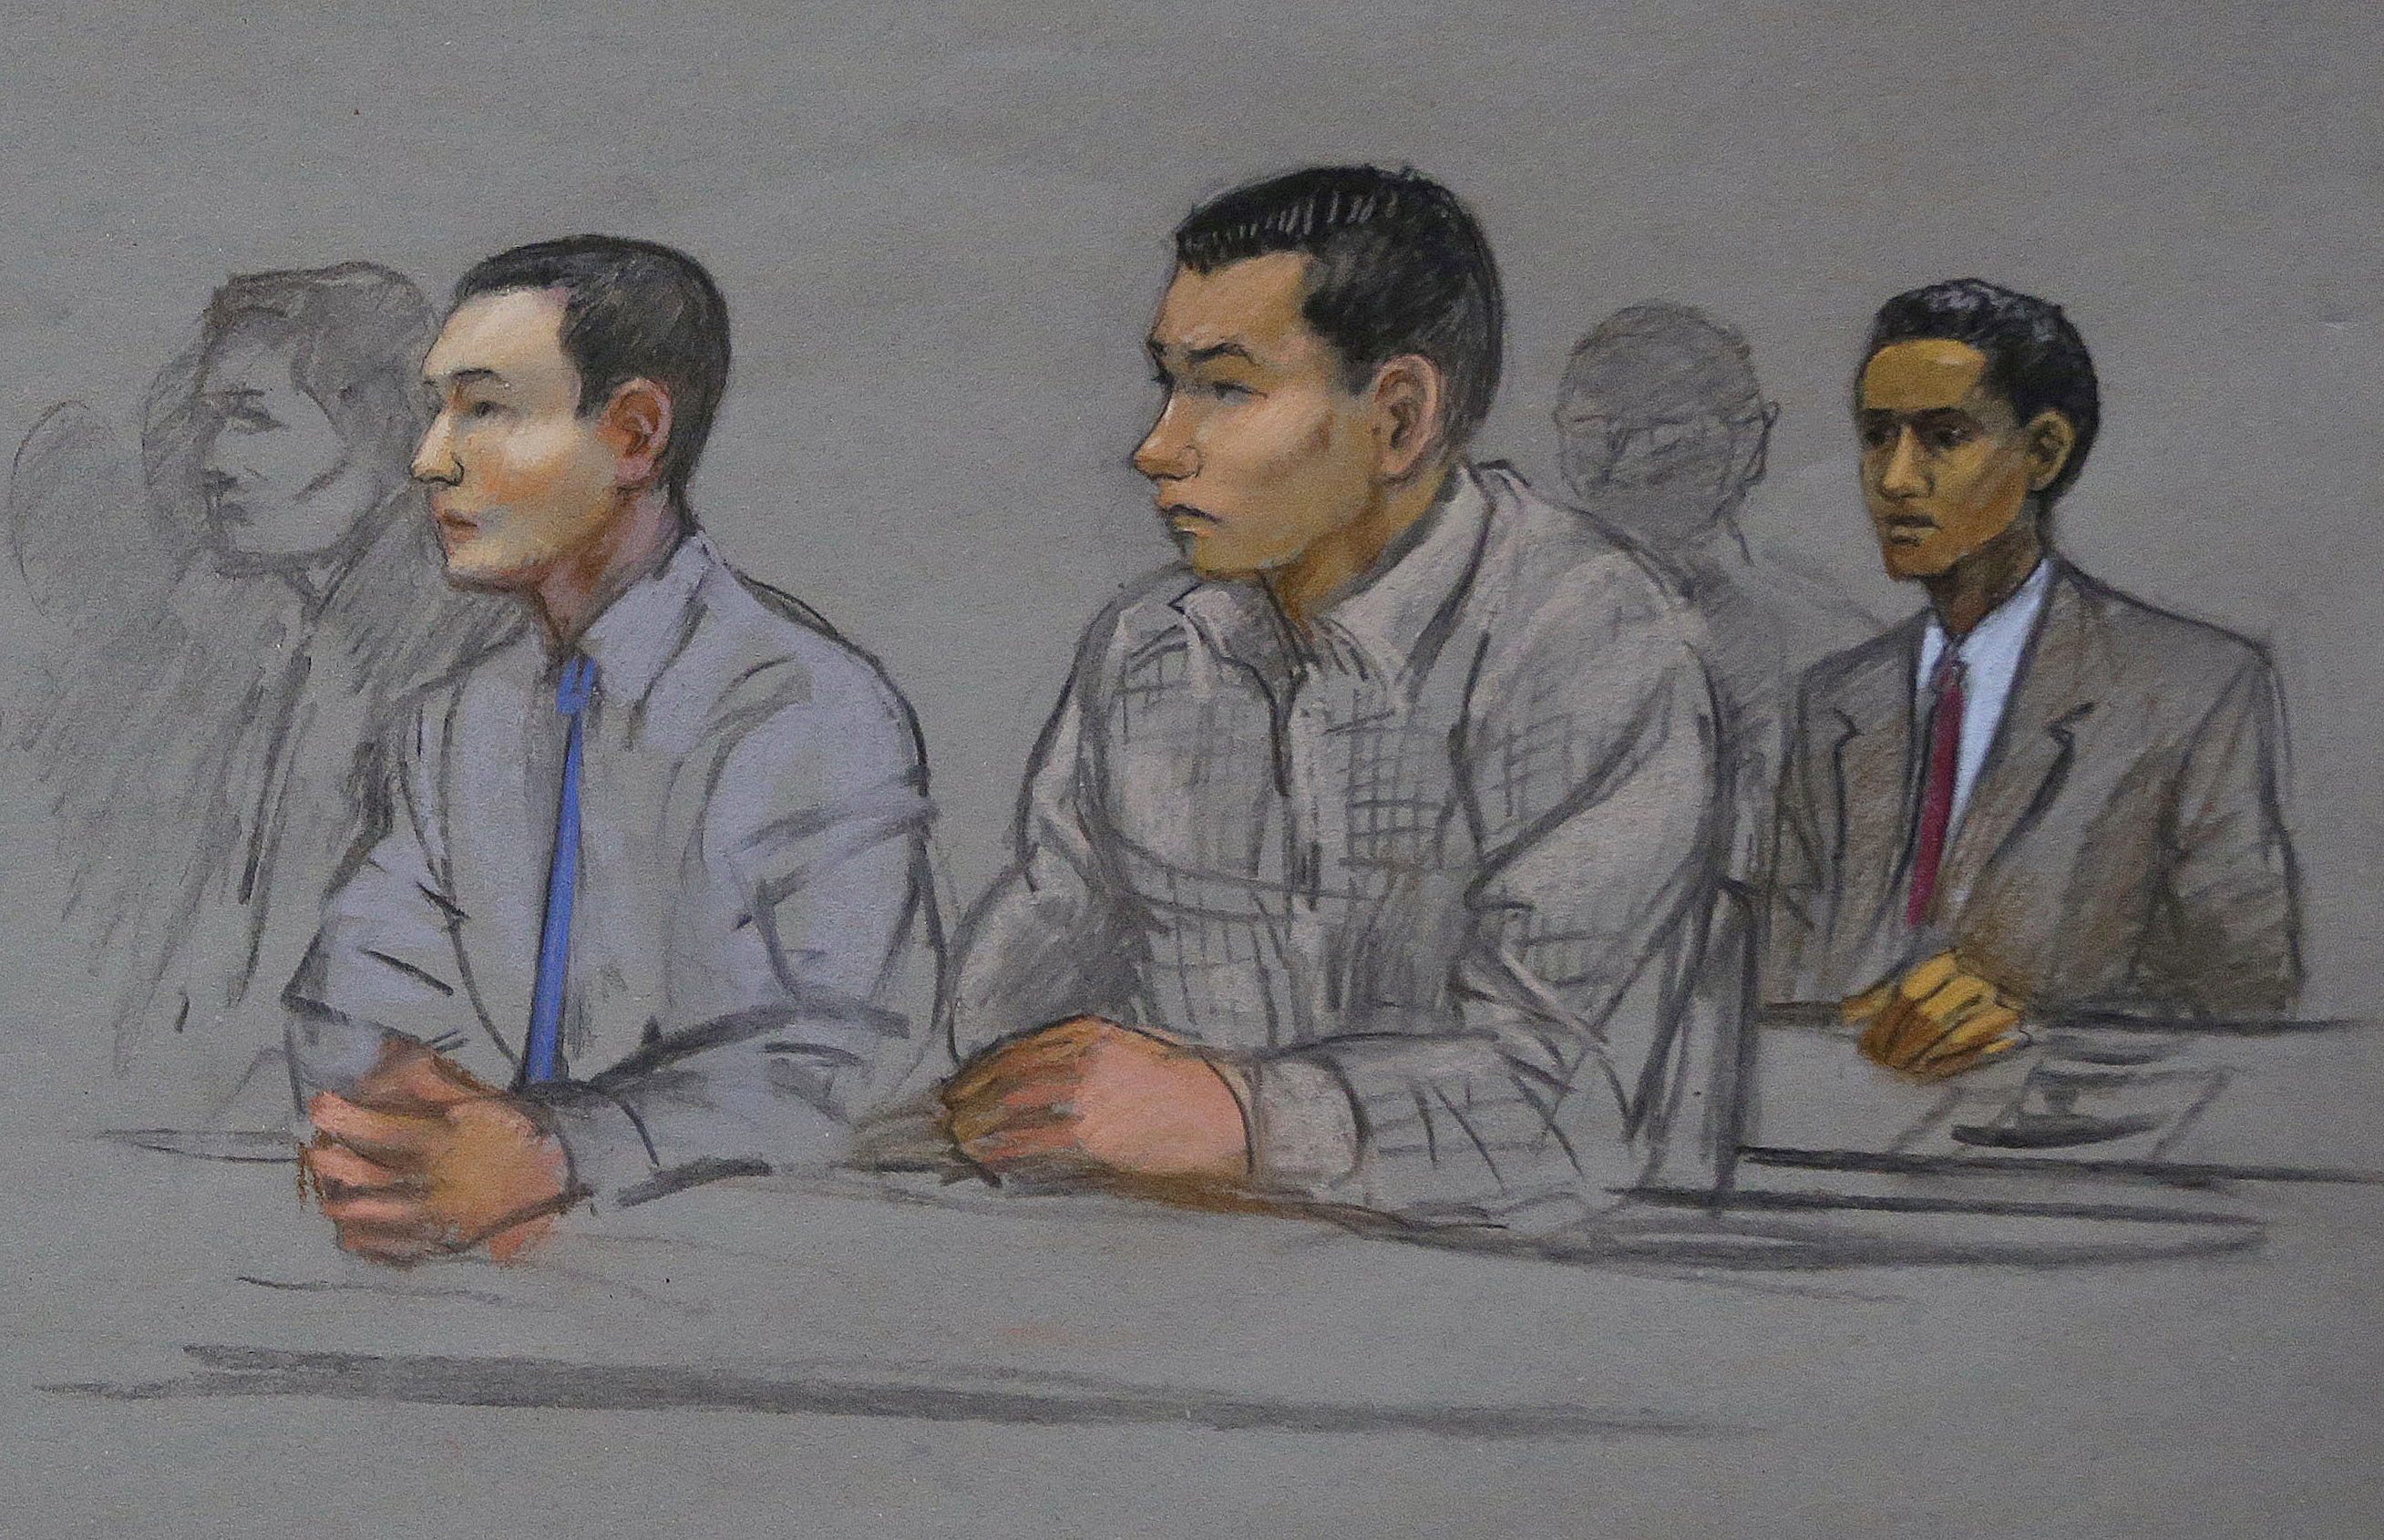 This courtroom sketch shows defendants Azamat Tazhayakov, left, Dias Kadyrbayev, center, and Robel Phillipos, right, college friends of Boston Marathon bombing suspect Dzhokhar Tsarnaev, during a hearing in federal court Tuesday, May 13, 2014, in Boston. (Jane Flavell Collins—AP)